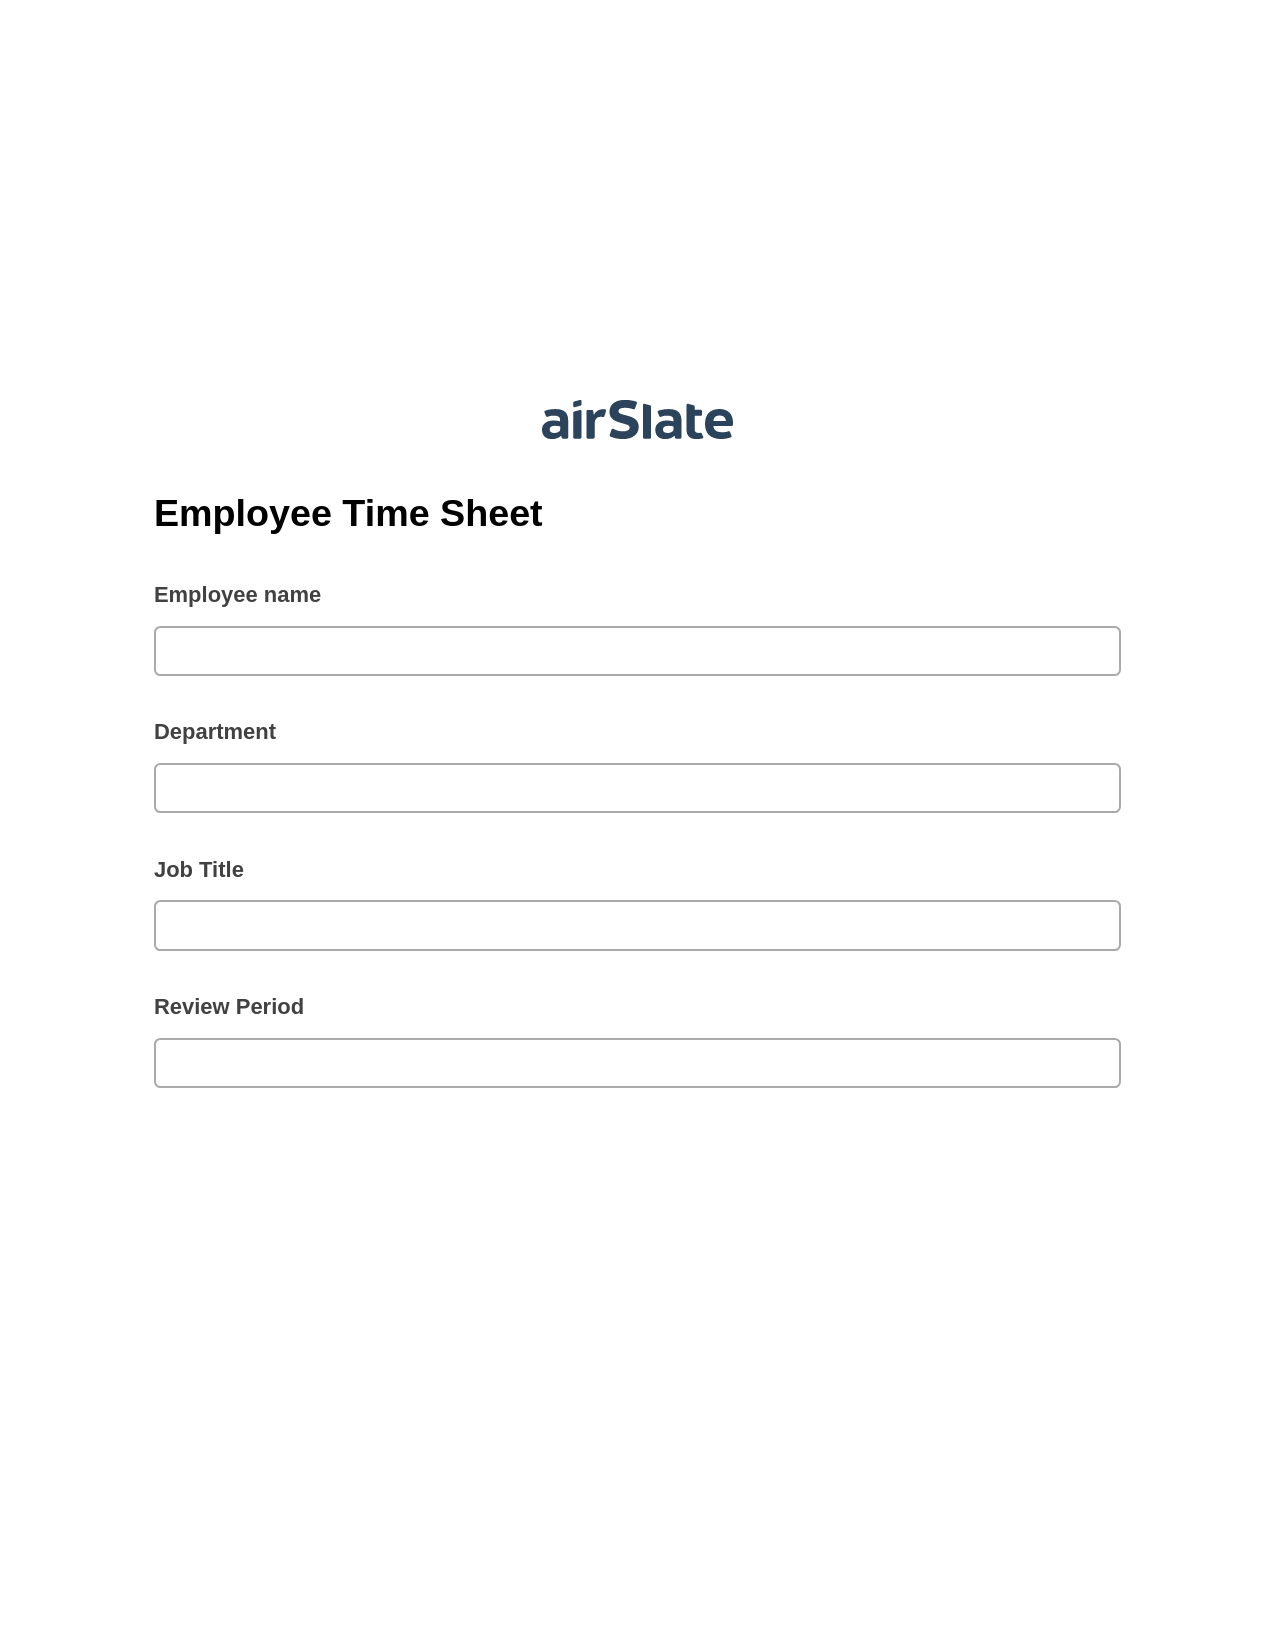 Multirole Employee Time Sheet Pre-fill Dropdowns from Airtable, Create slate addon, Export to Salesforce Record Bot